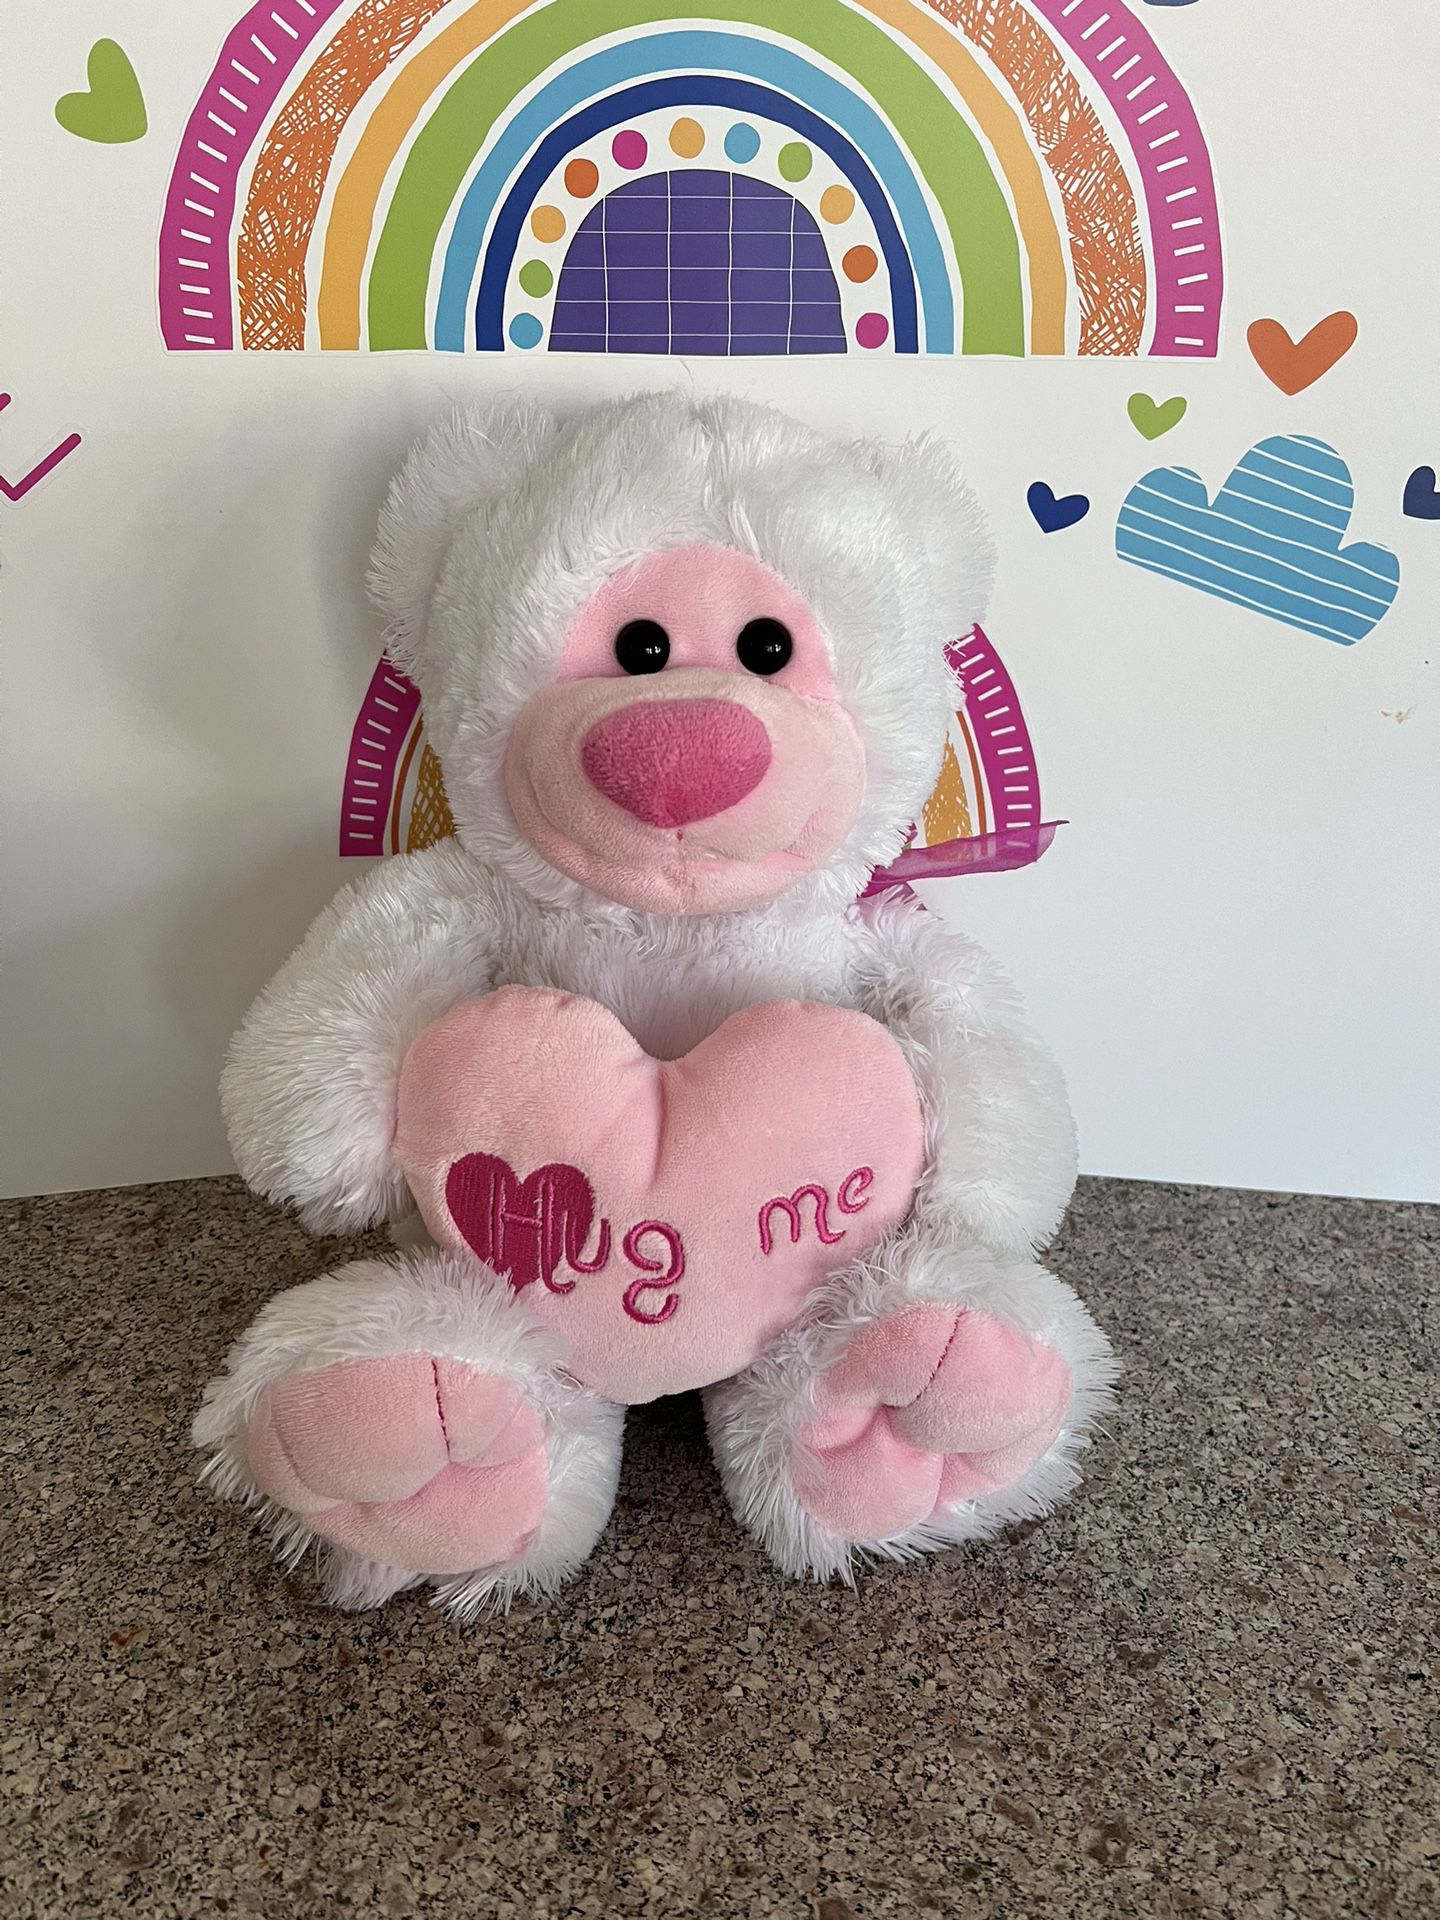 VALENTINE’S DAY TEDDY BEAR! WHITE AND PINK 16 INCH